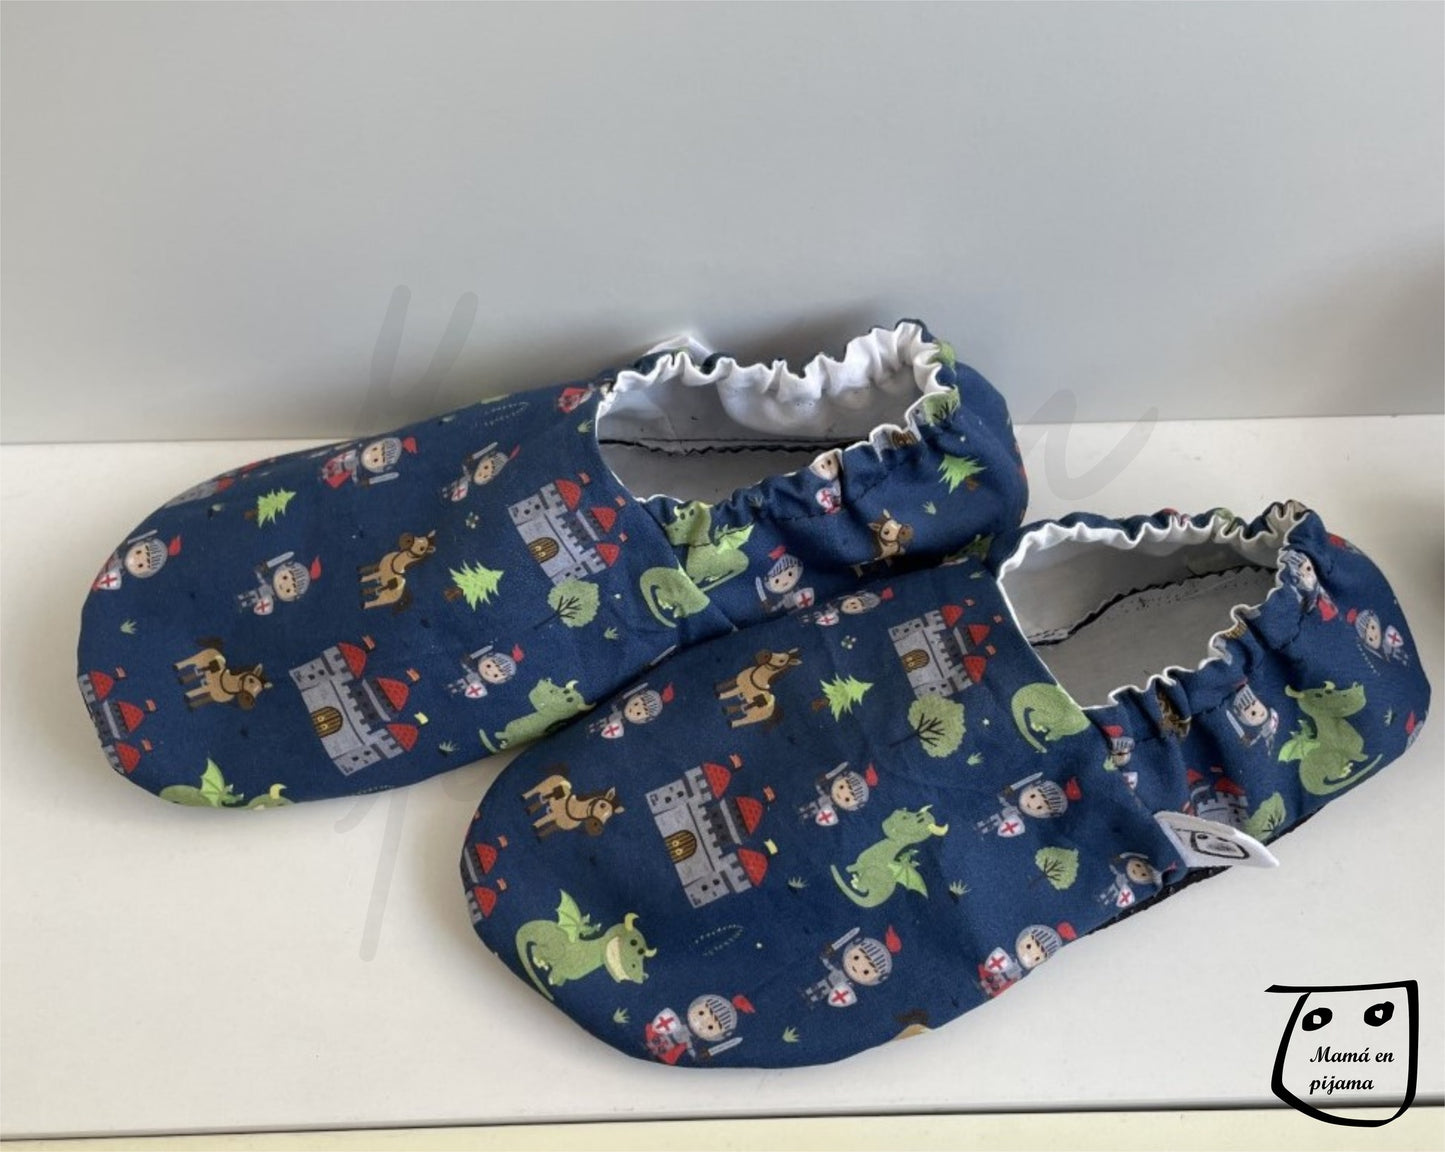 Young Child Menta Shoes Slippers 6 Sizes PDF Pattern and 